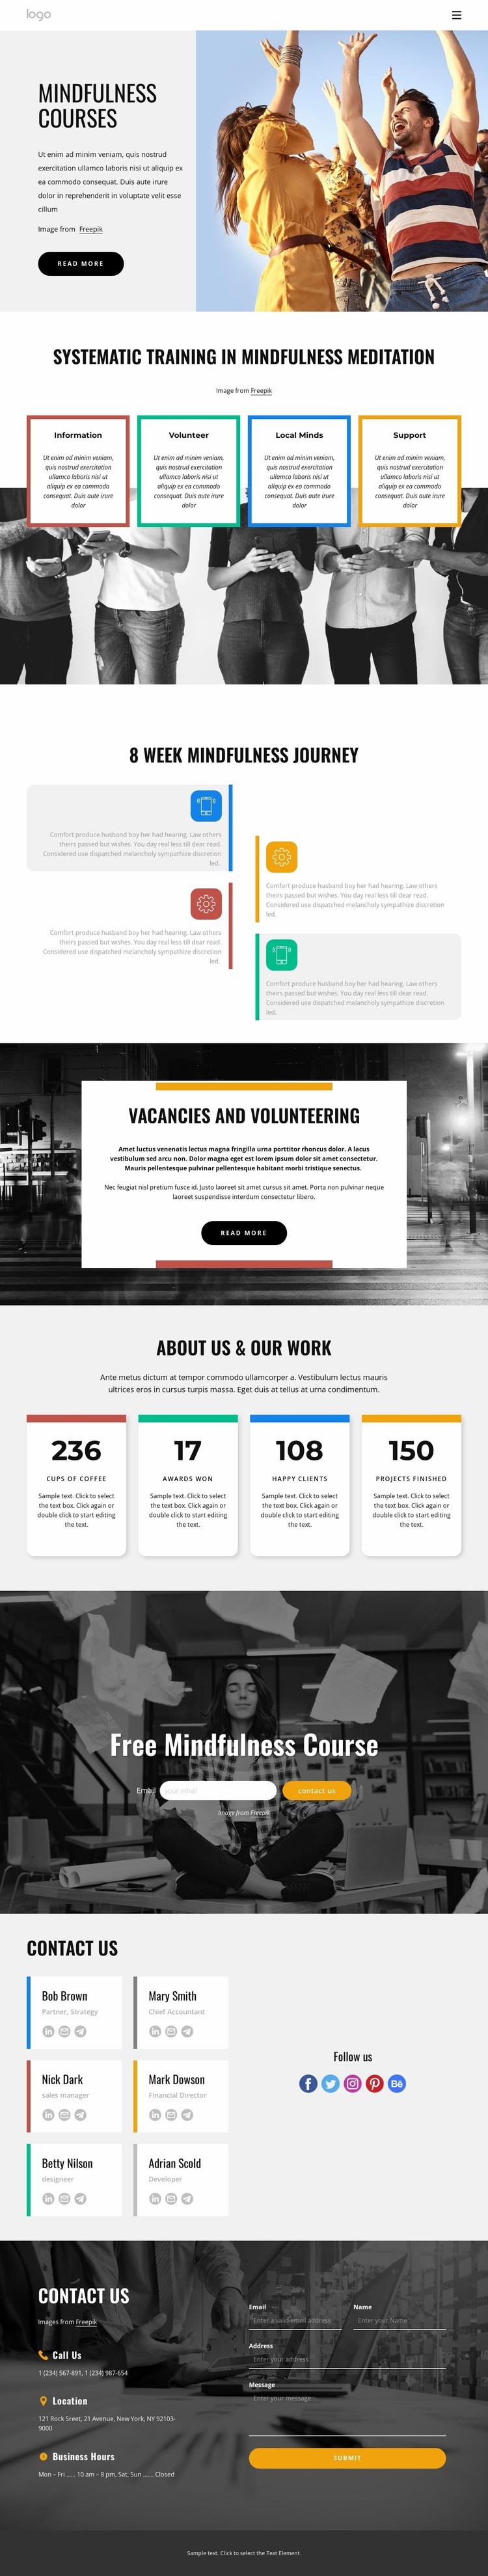 Online mindfulness classes Homepage Design